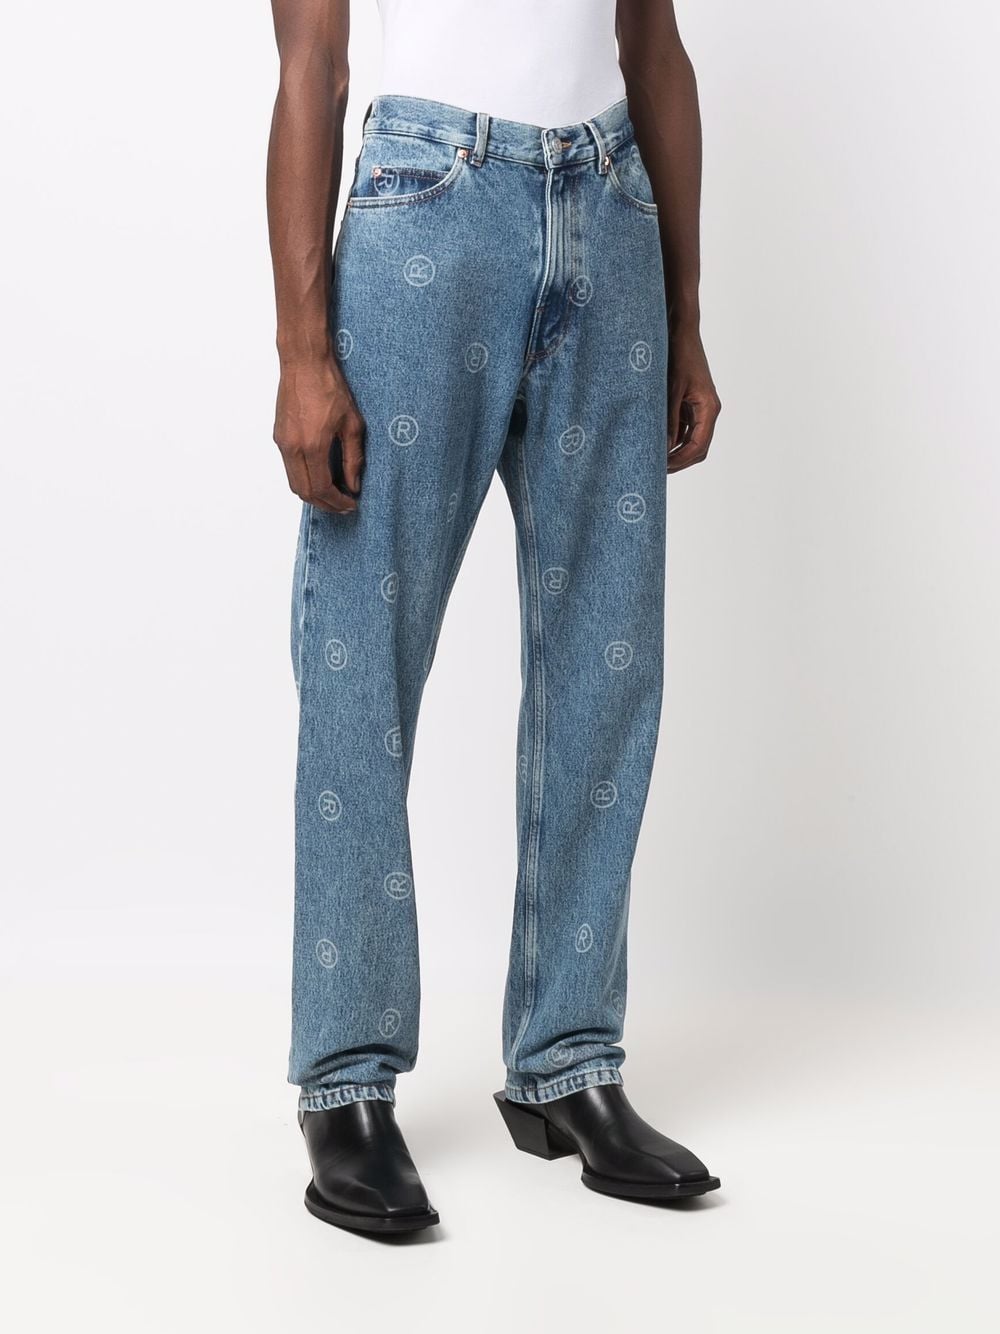 Martine Rose all-over Logo Print Jeans - Farfetch